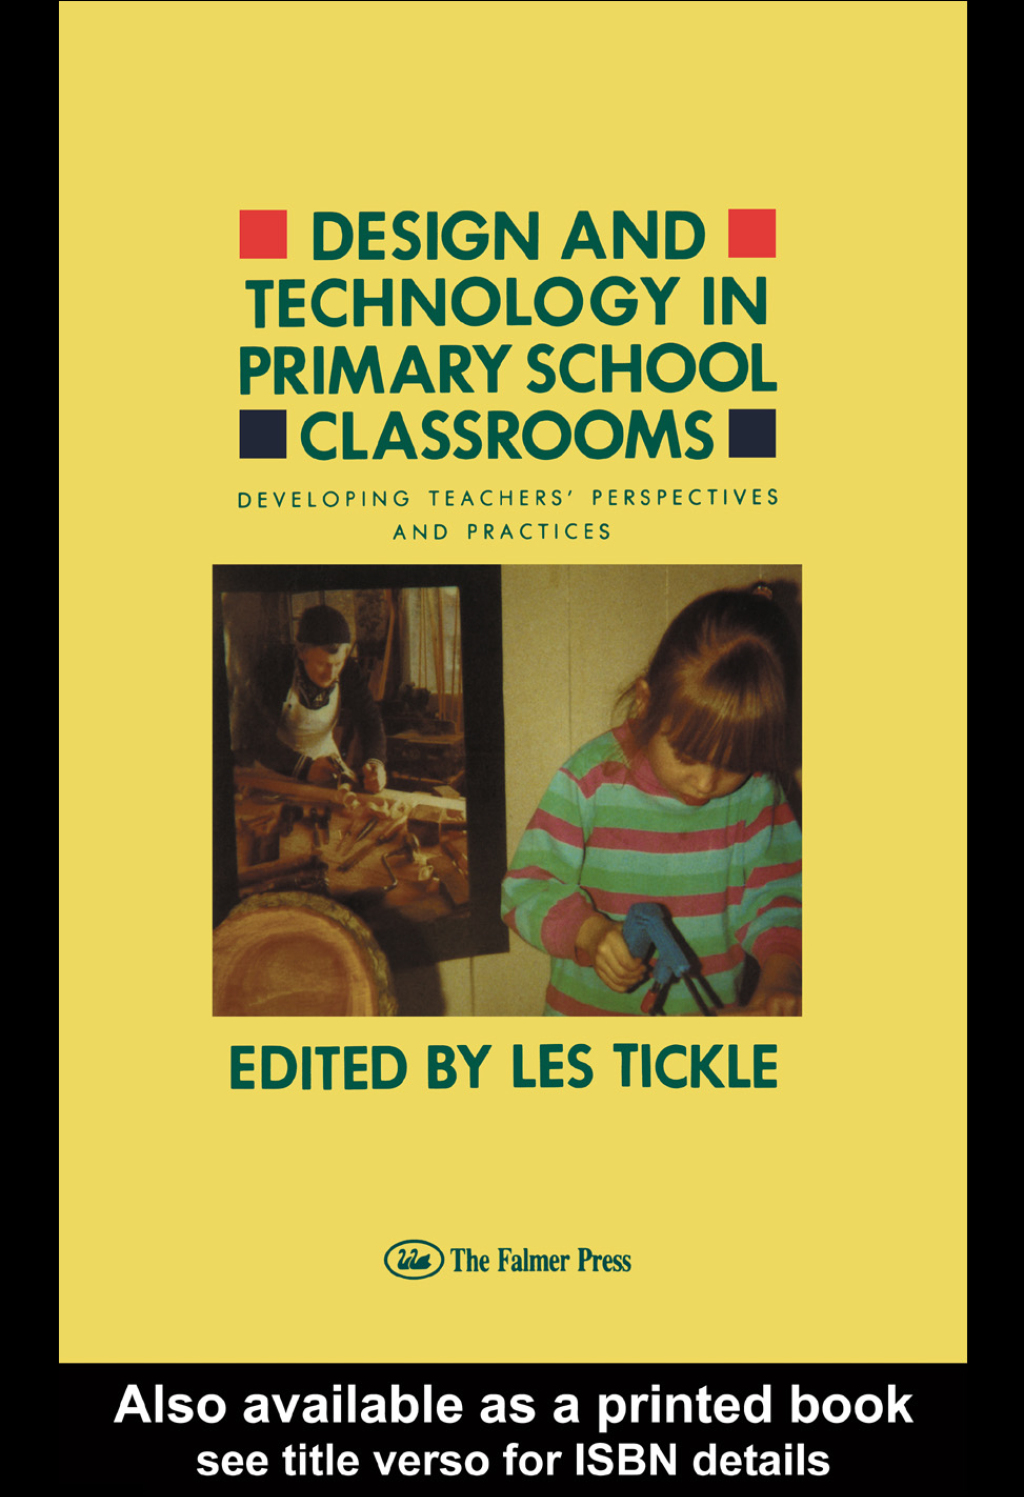 Design And Technology In Primary School Classrooms (eBook) - Les Tickle